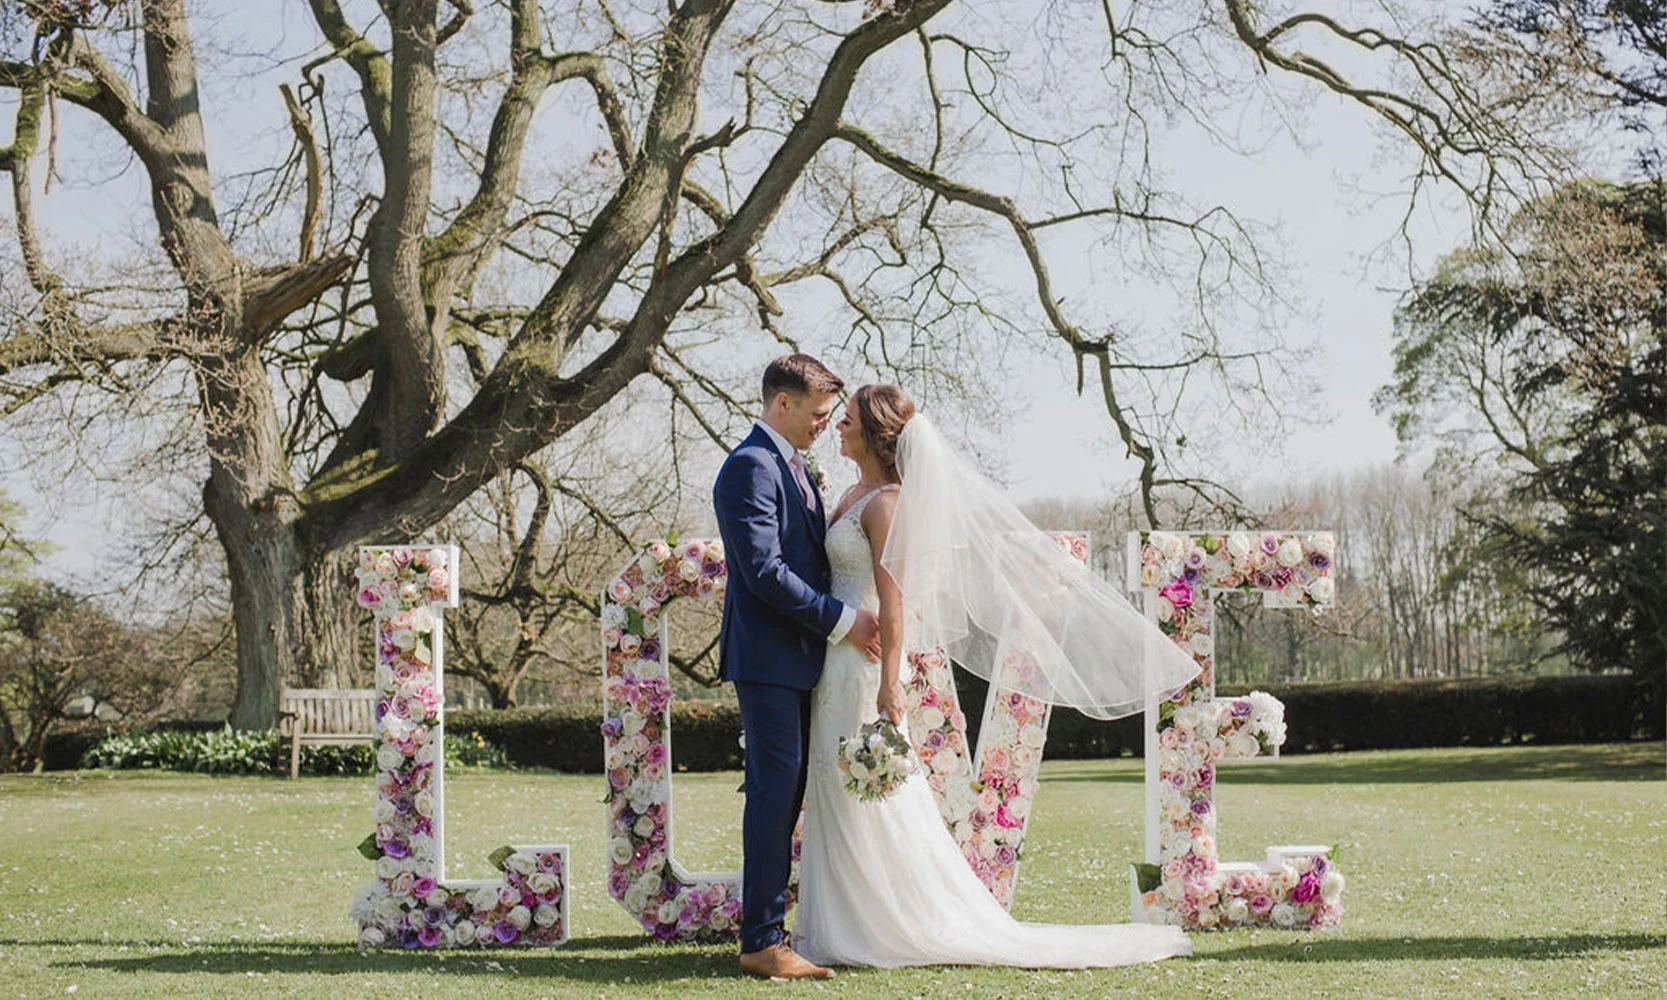 7 Of The Best London Wedding Venues (with reviews) - The Hurlingham Club